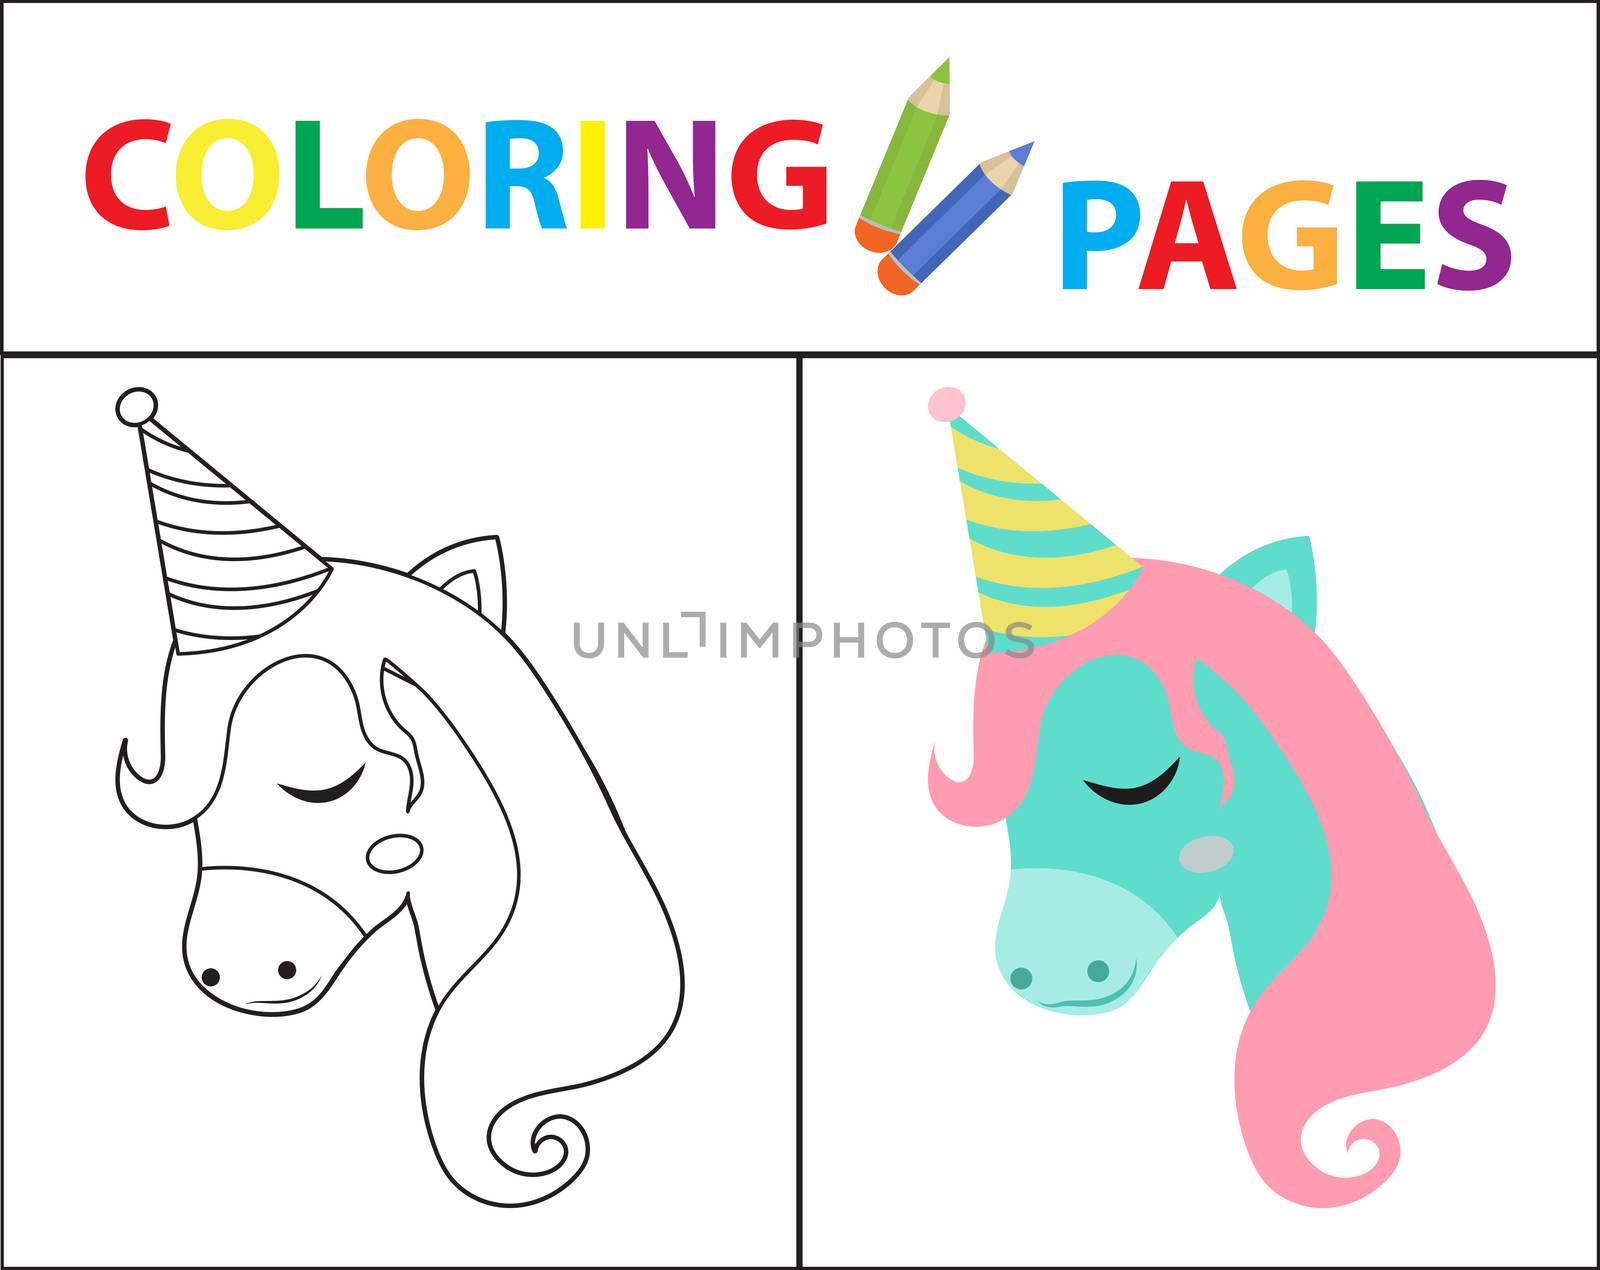 Coloring book page for kids. Birthday unicorn. Sketch outline and color version. Childrens education. illustration